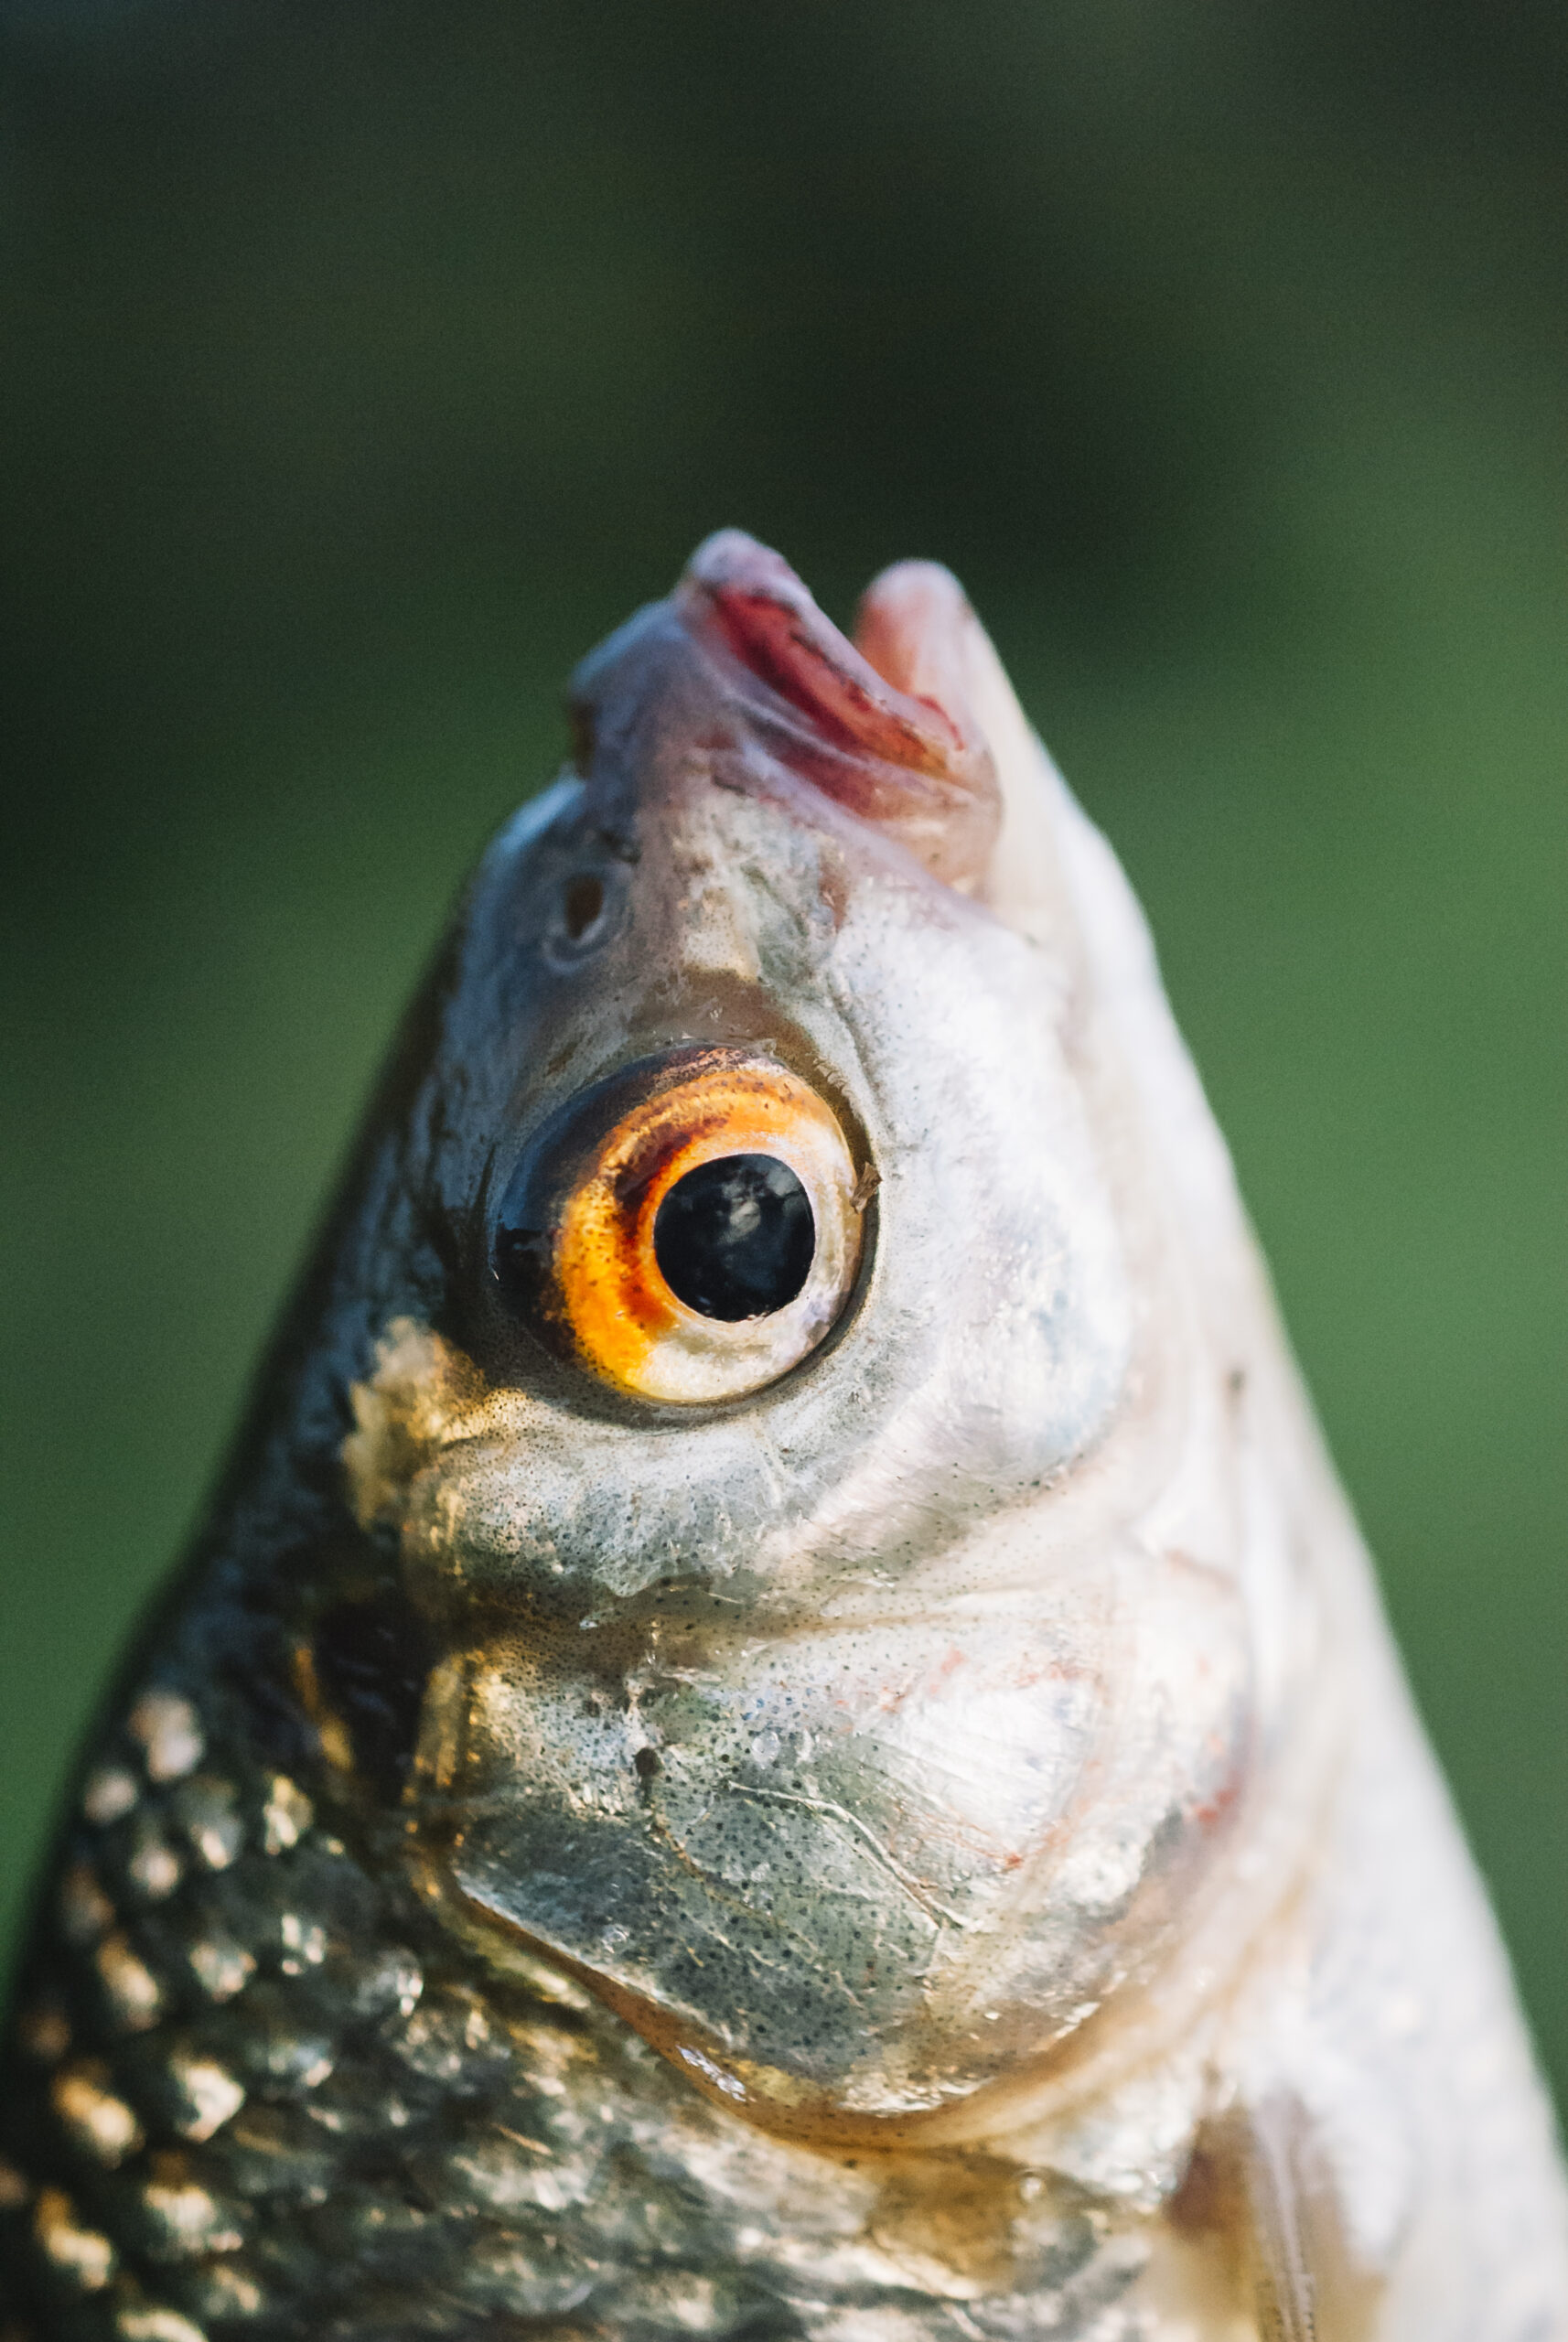 close-up-fish-s-head-against-blurred-background